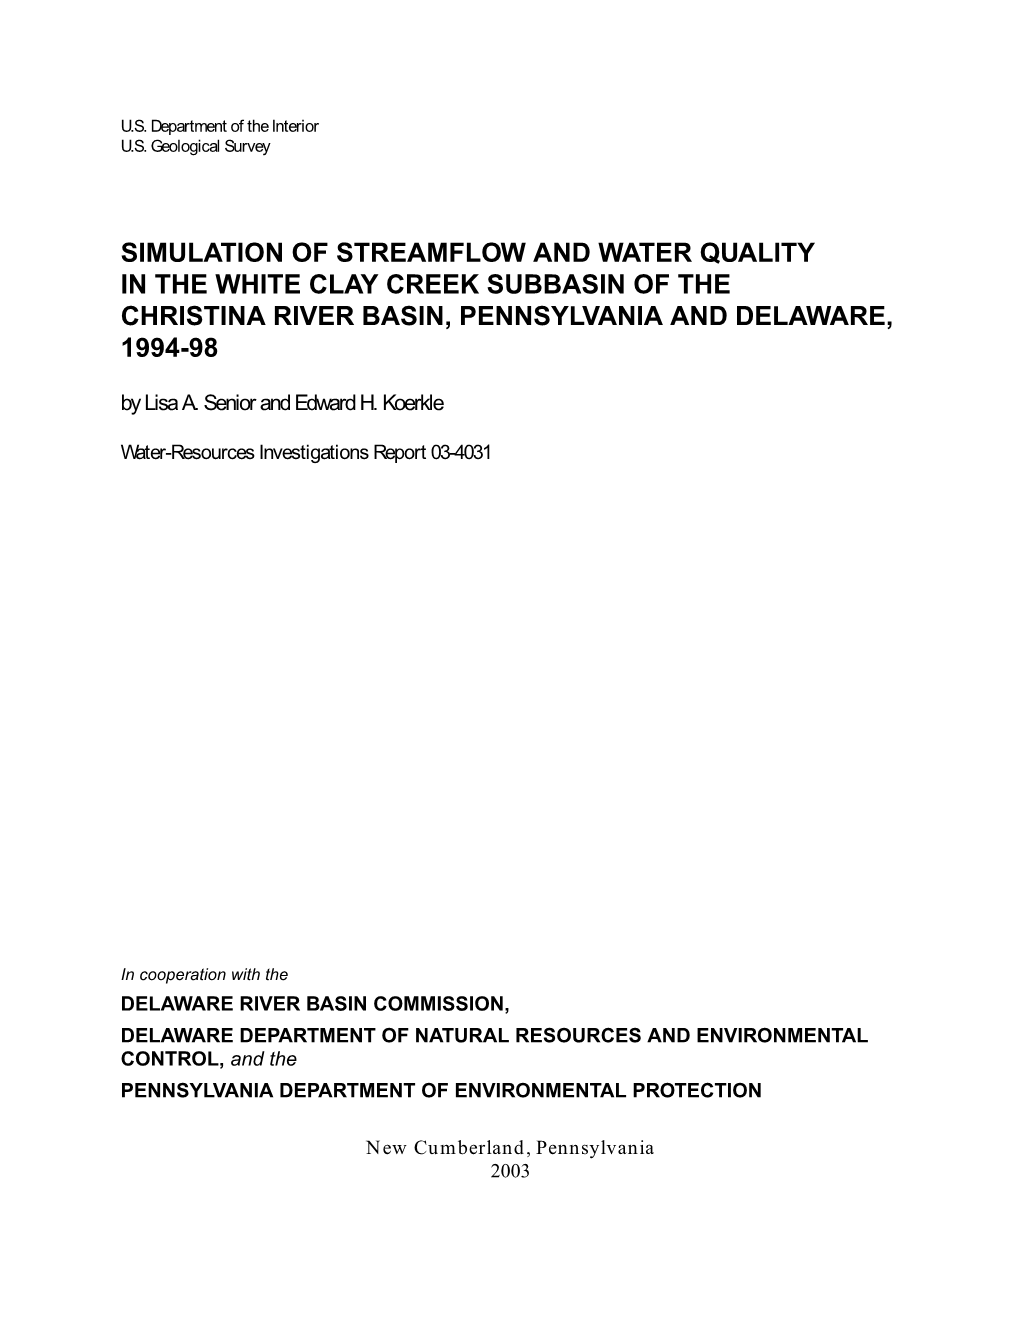 Simulation of Streamflow and Water Quality in the White Clay Creek Subbasin of the Christina River Basin, Pennsylvania and Delaware, 1994-98